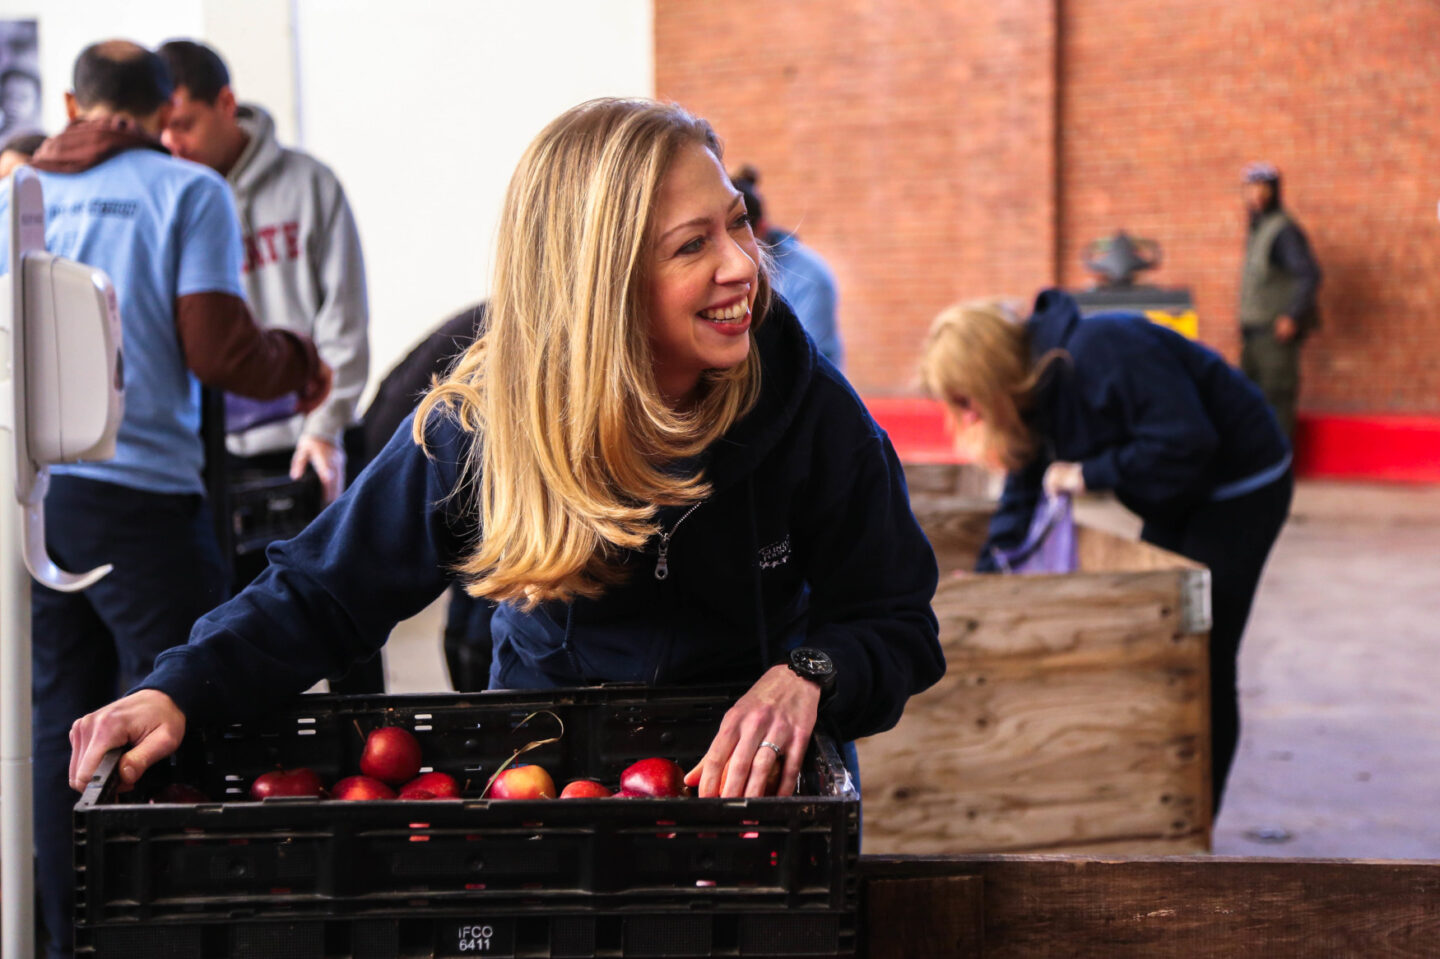 Chelsea Clinton stands over a container of apples